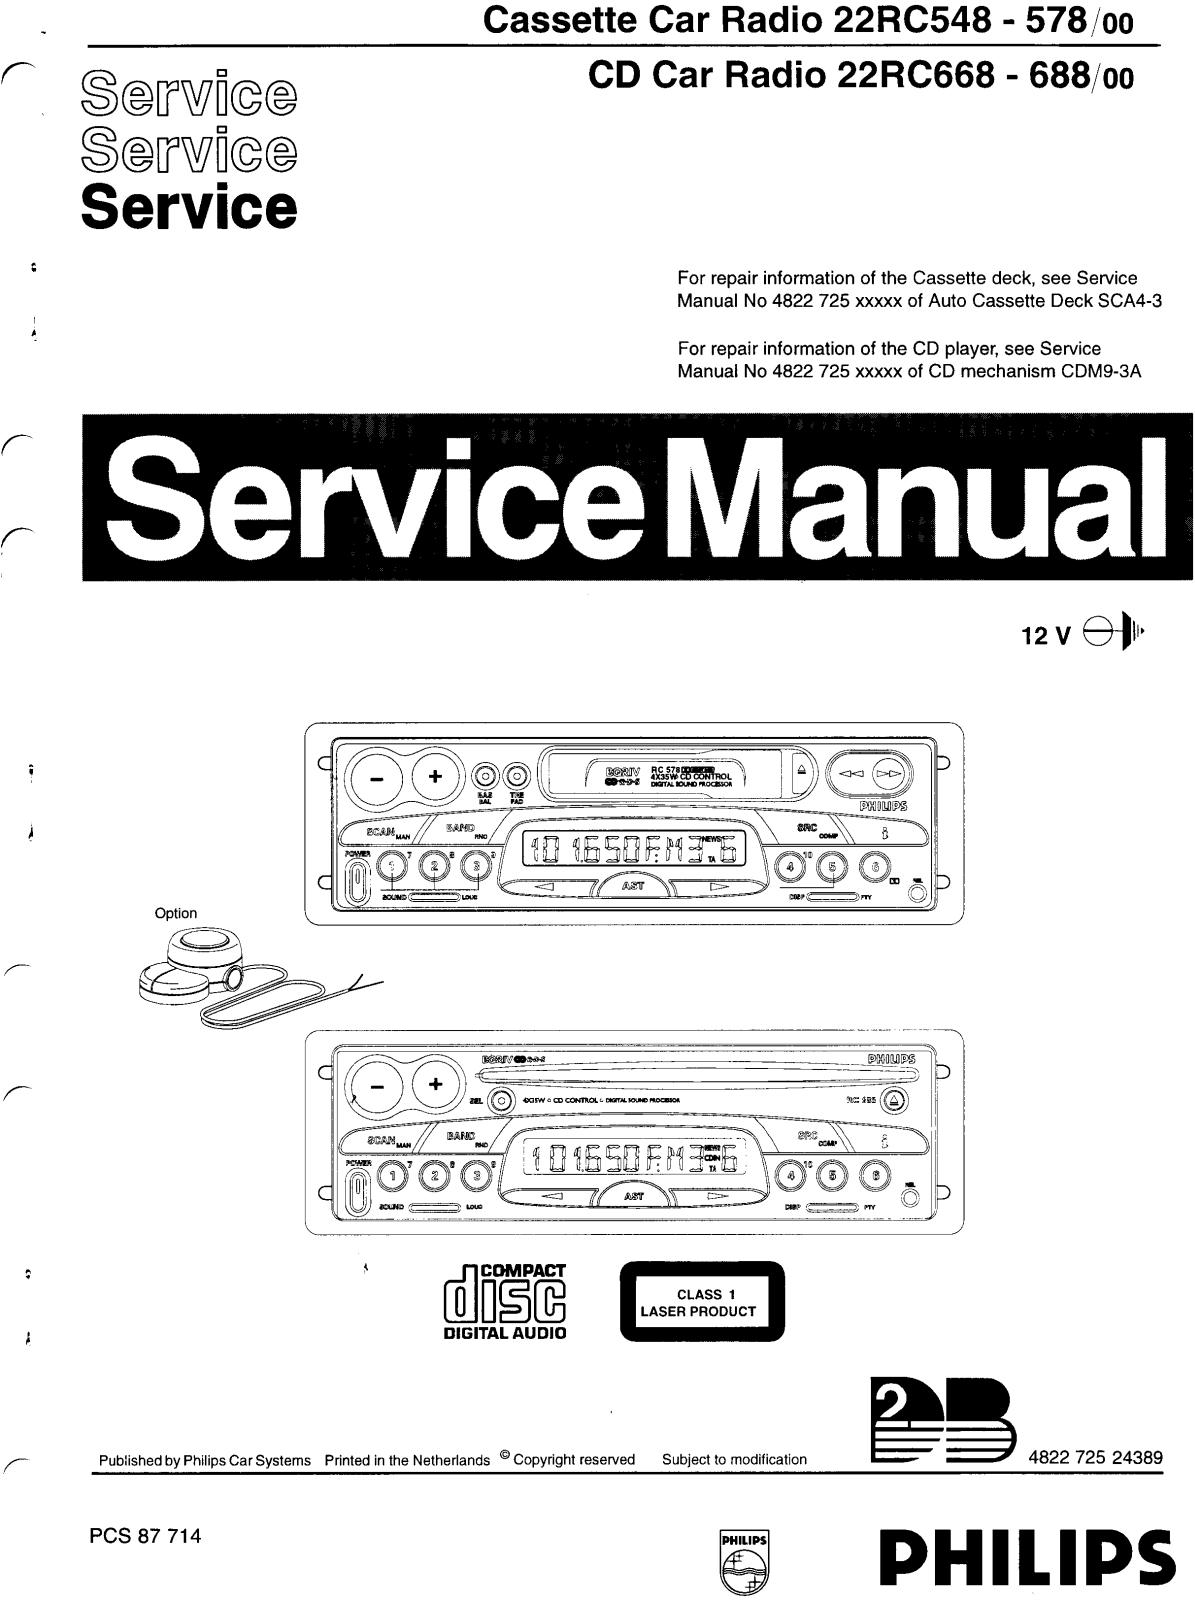 Philips 22-RC-688, 22-RC-578, 22-RC-548, 22-RC-668 Service Manual